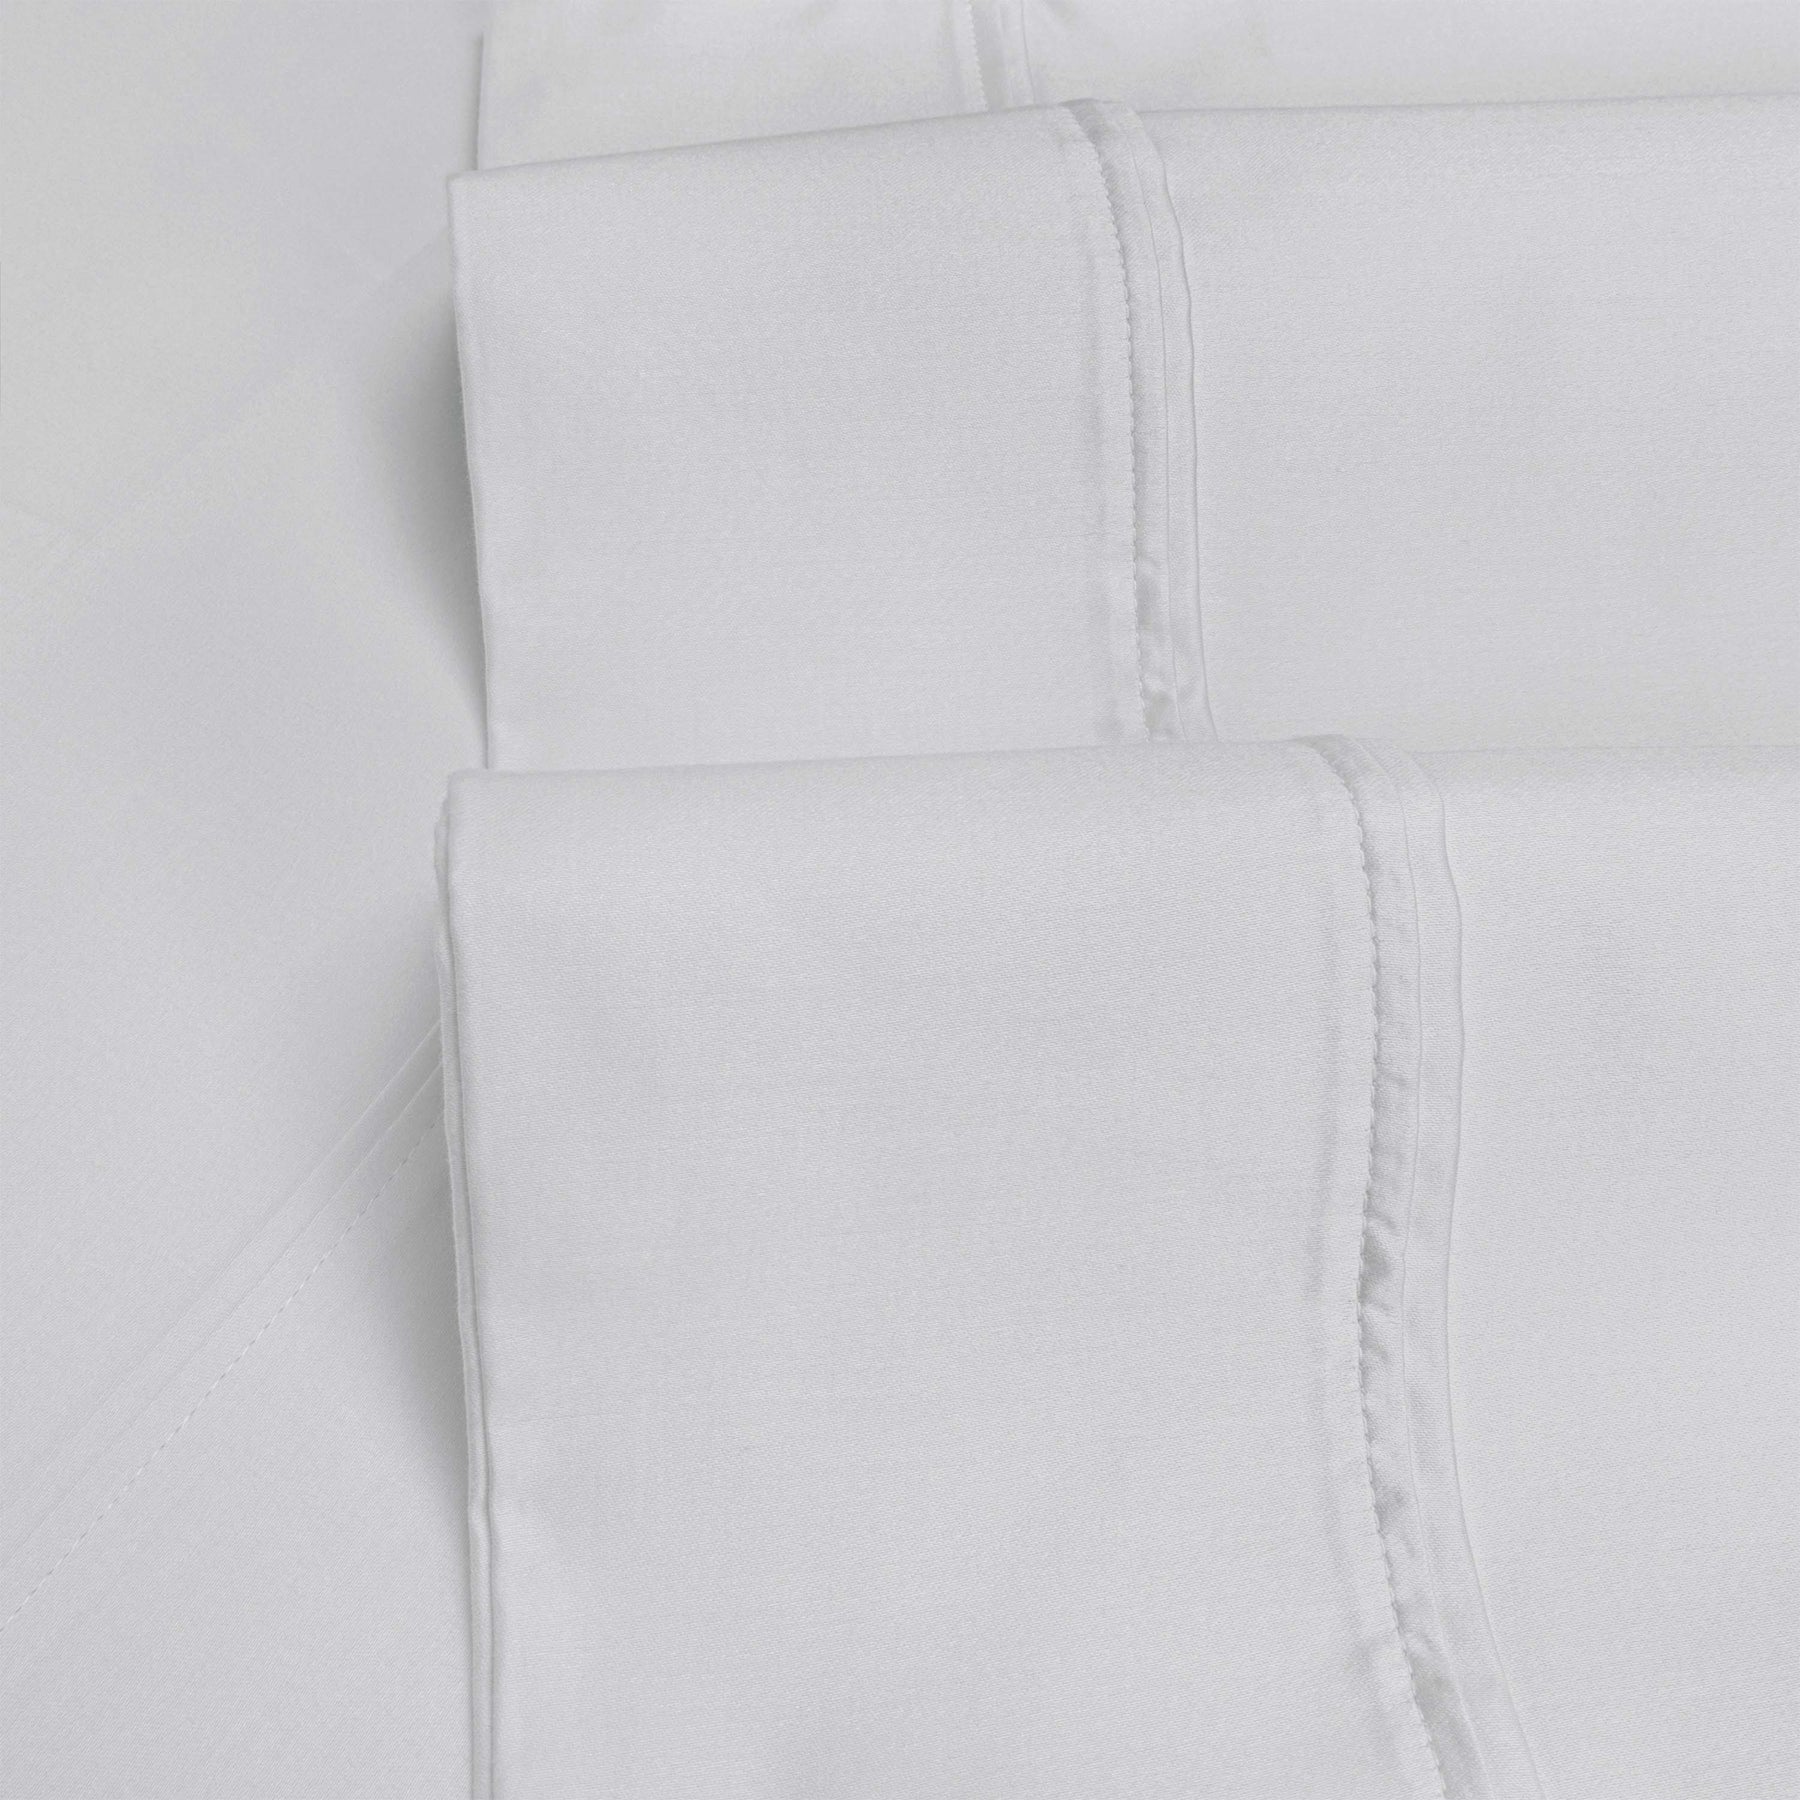 Egyptian Cotton 1200 Thread Count Eco-Friendly Solid Sheet Set - Platinum